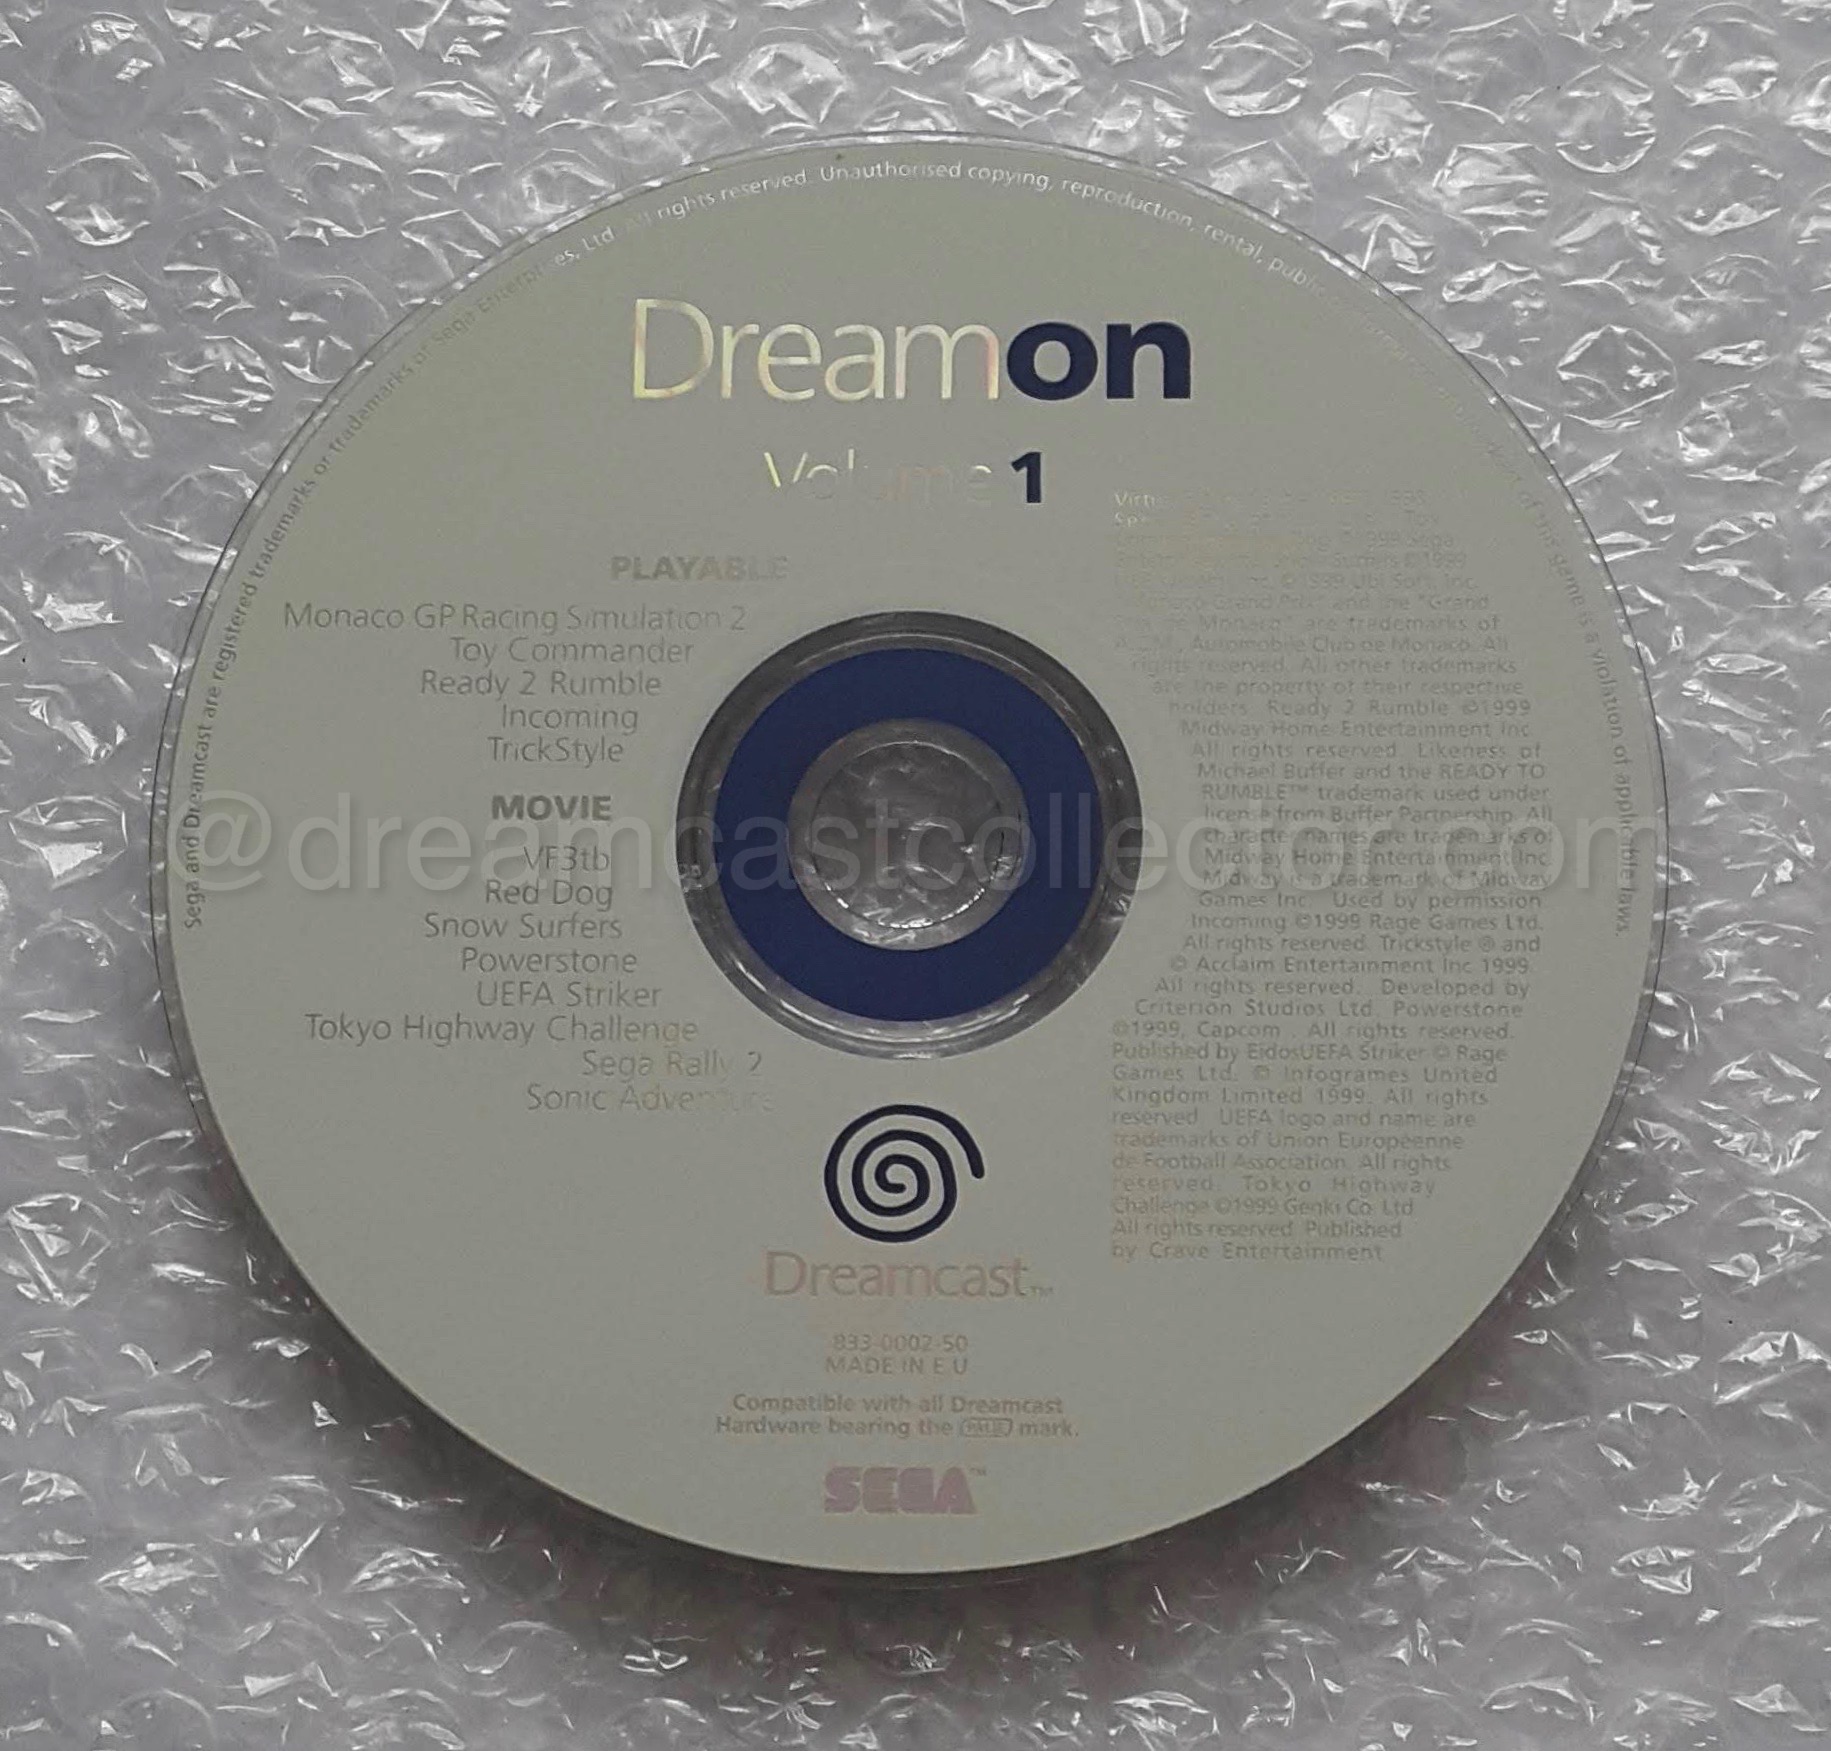 While not part of the Japanese 610- catalogue I'll provide a picture of my copy of the European produced incarnation of DreamOn Volume 1 for comparison. I expect that the disc produced in the greatest numbers for the Japanese market would likely be Dream Passport 2 or Dream Passport 3. But I'm convinced that the combined totals for the Japanese & PAL DreamOn Volume 1 likely exceeds that of those browser discs.